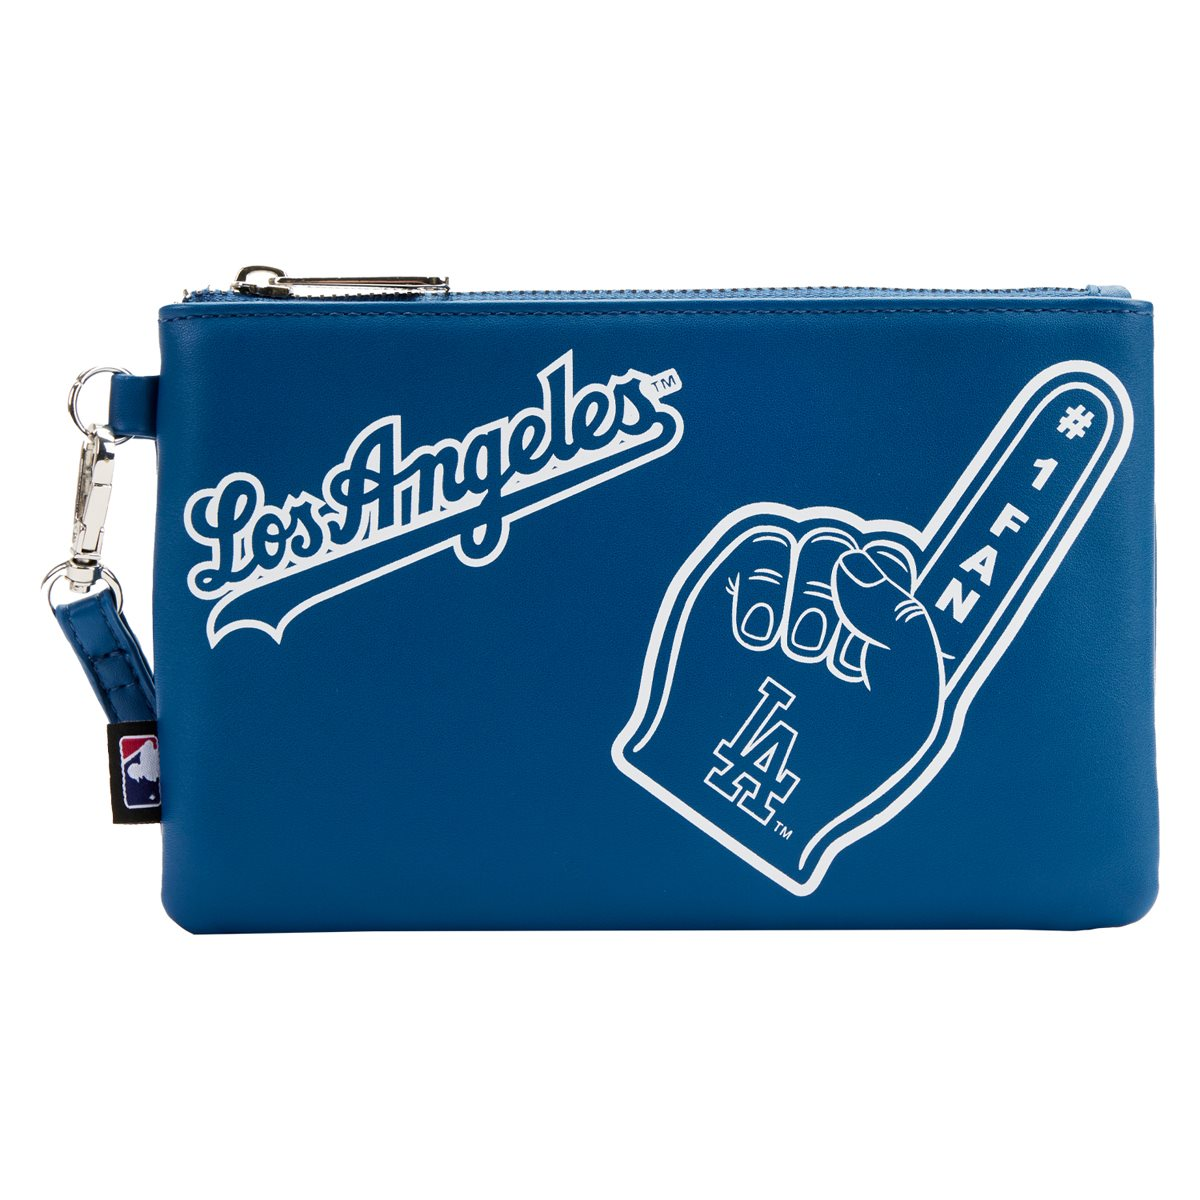 New York Yankees Loungefly Stadium Crossbody Bag with Pouch